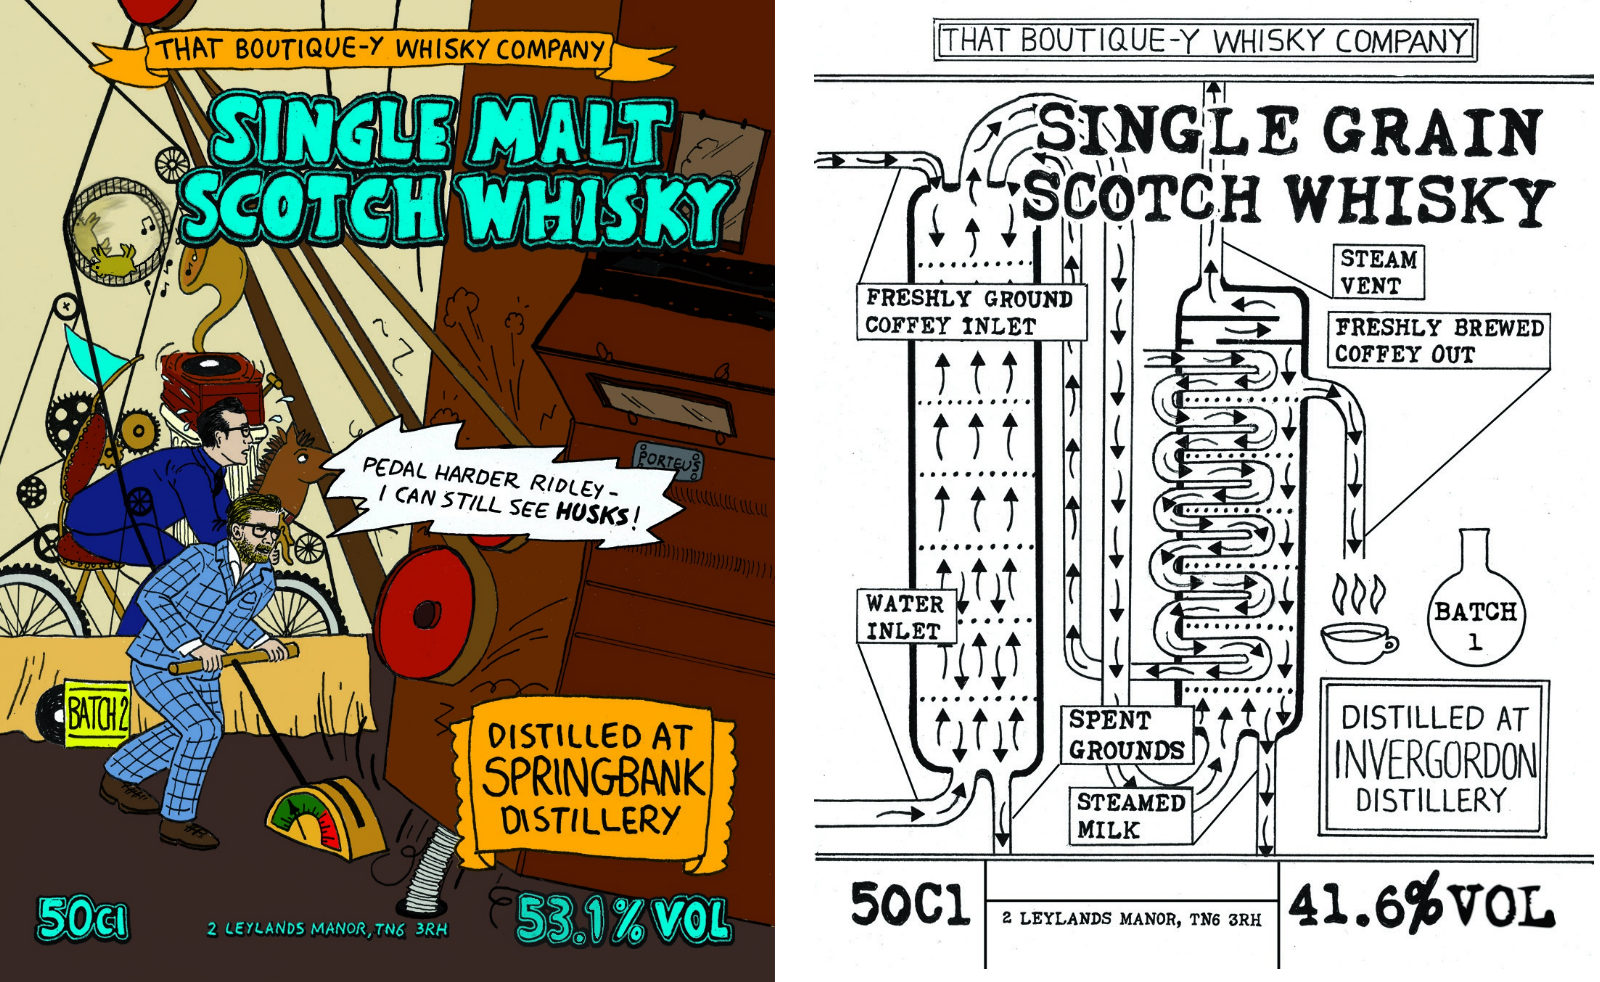 That Boutique-y Whisky Co Master of Malt